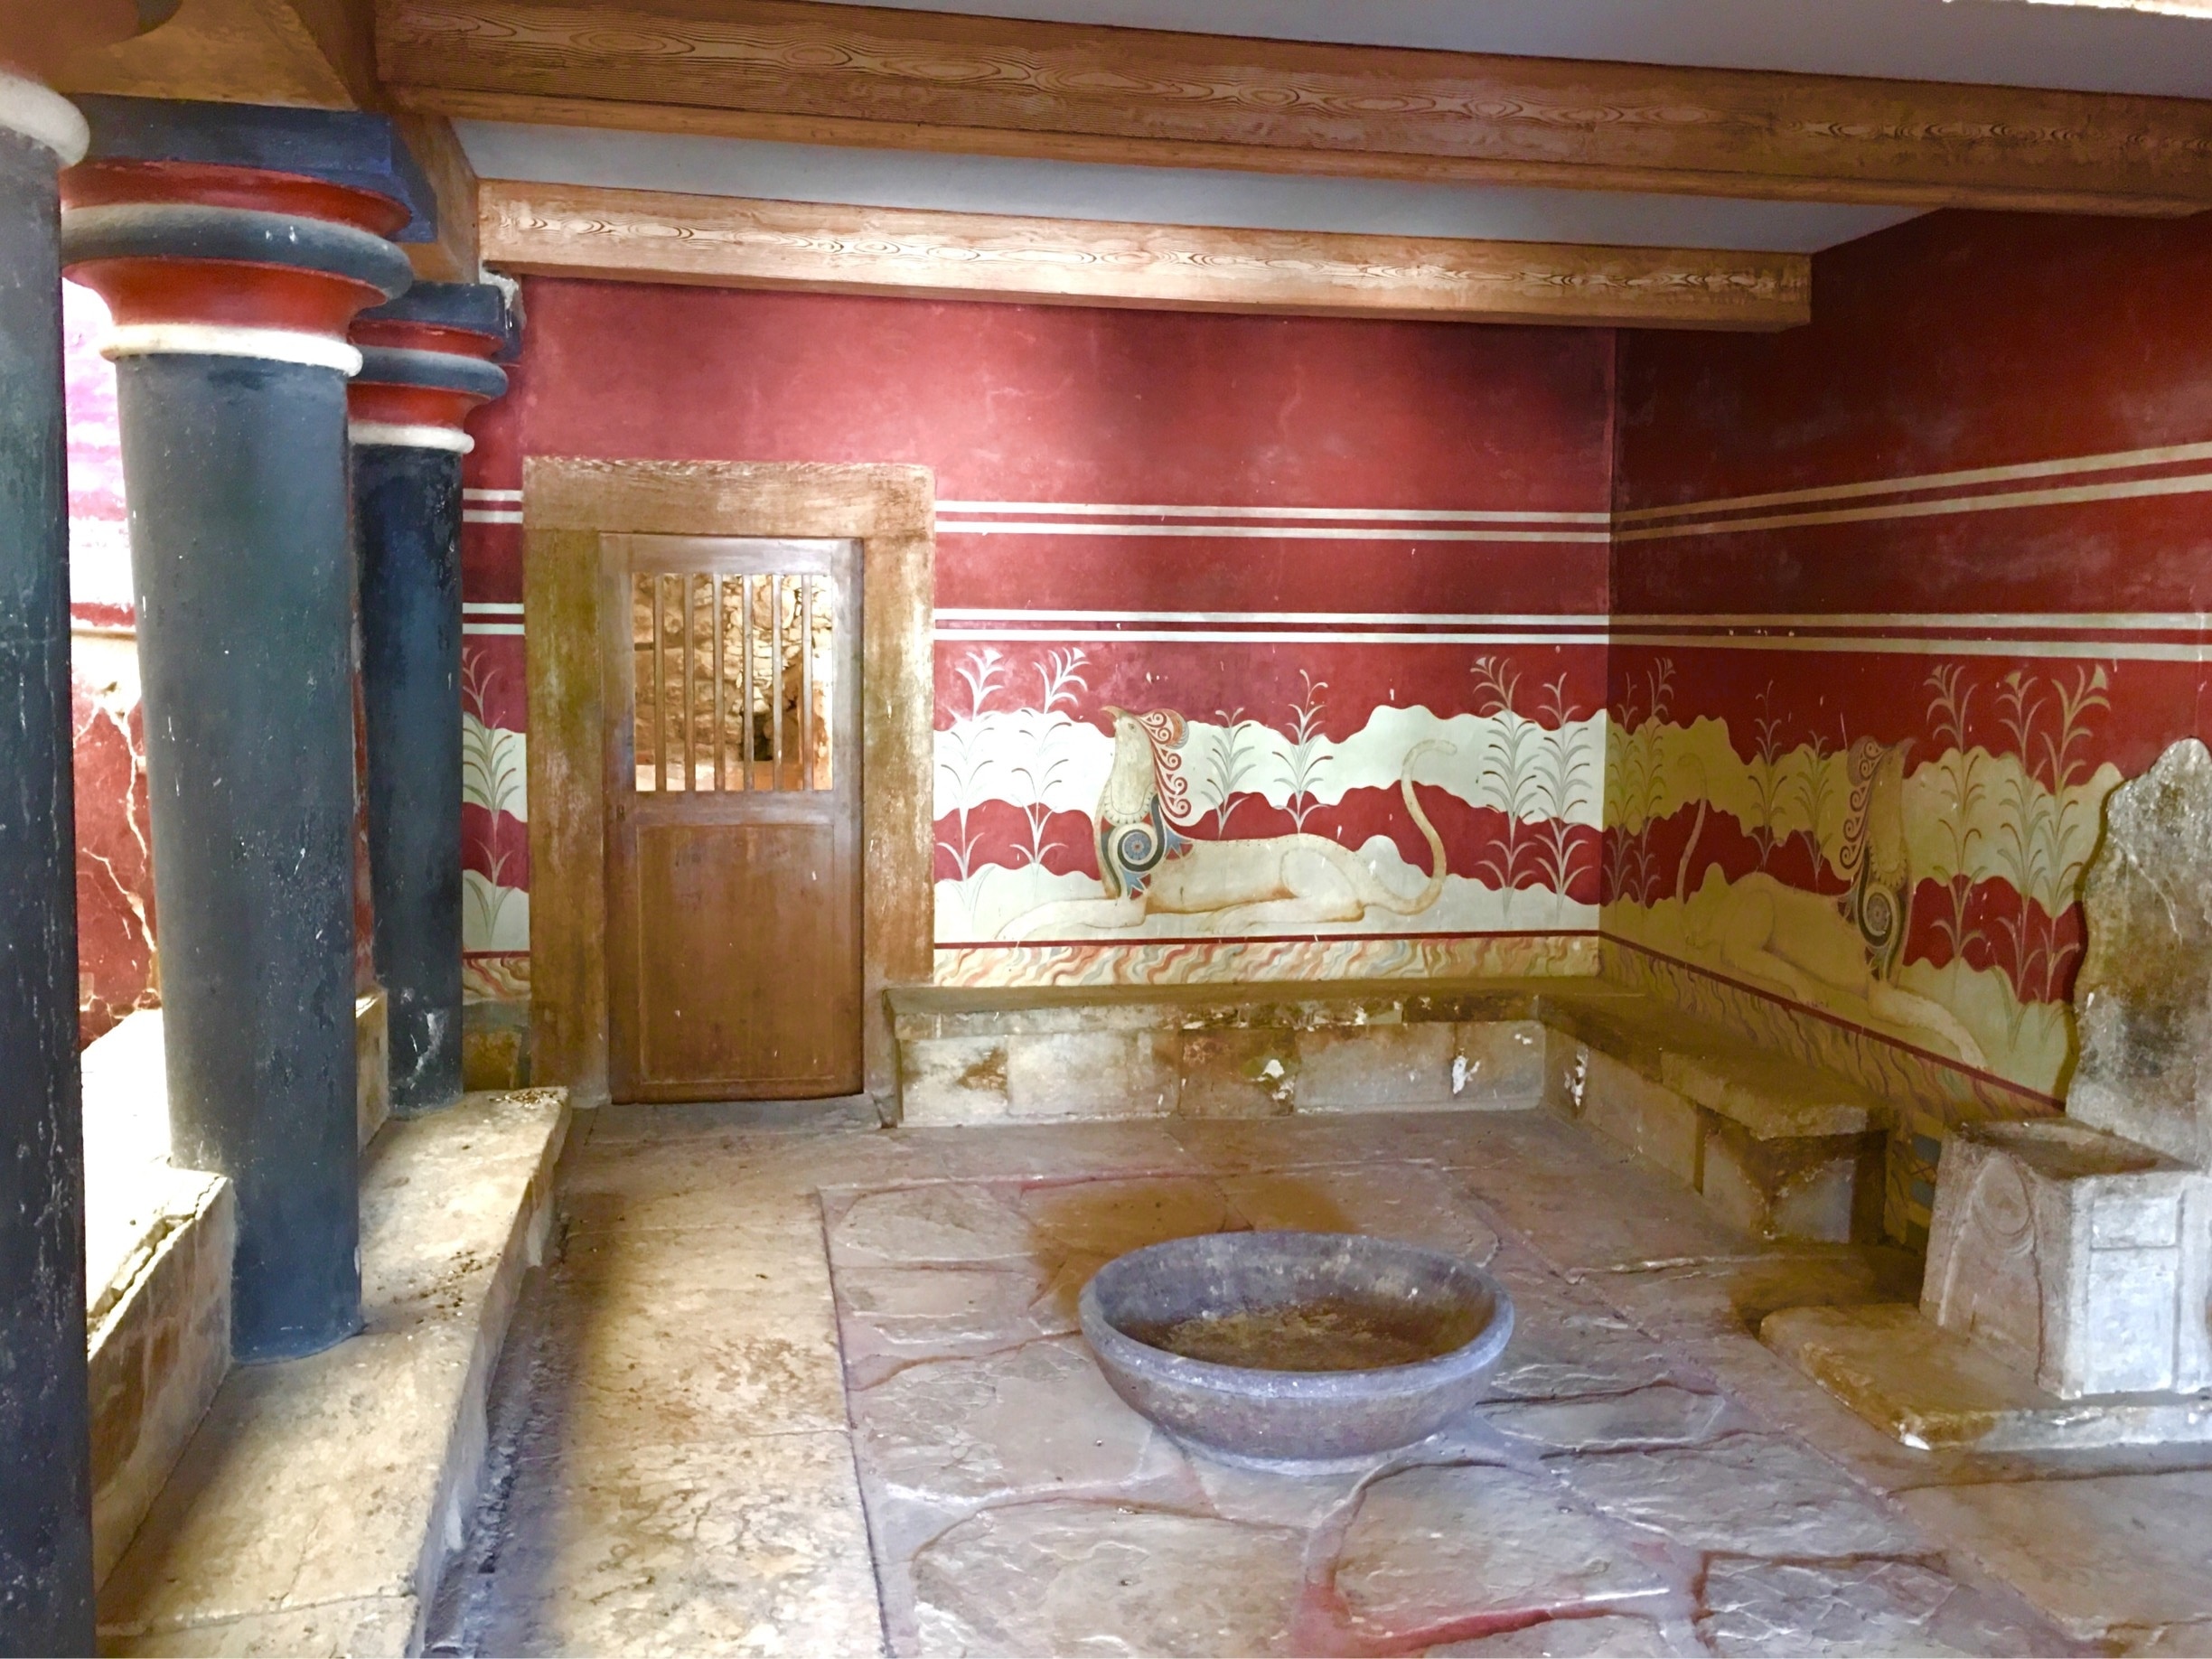 The Throne Room of Knossos, Crete island, is the oldest throne room in Europe, it was built during the 15th century BC for ceremonial purposes. 